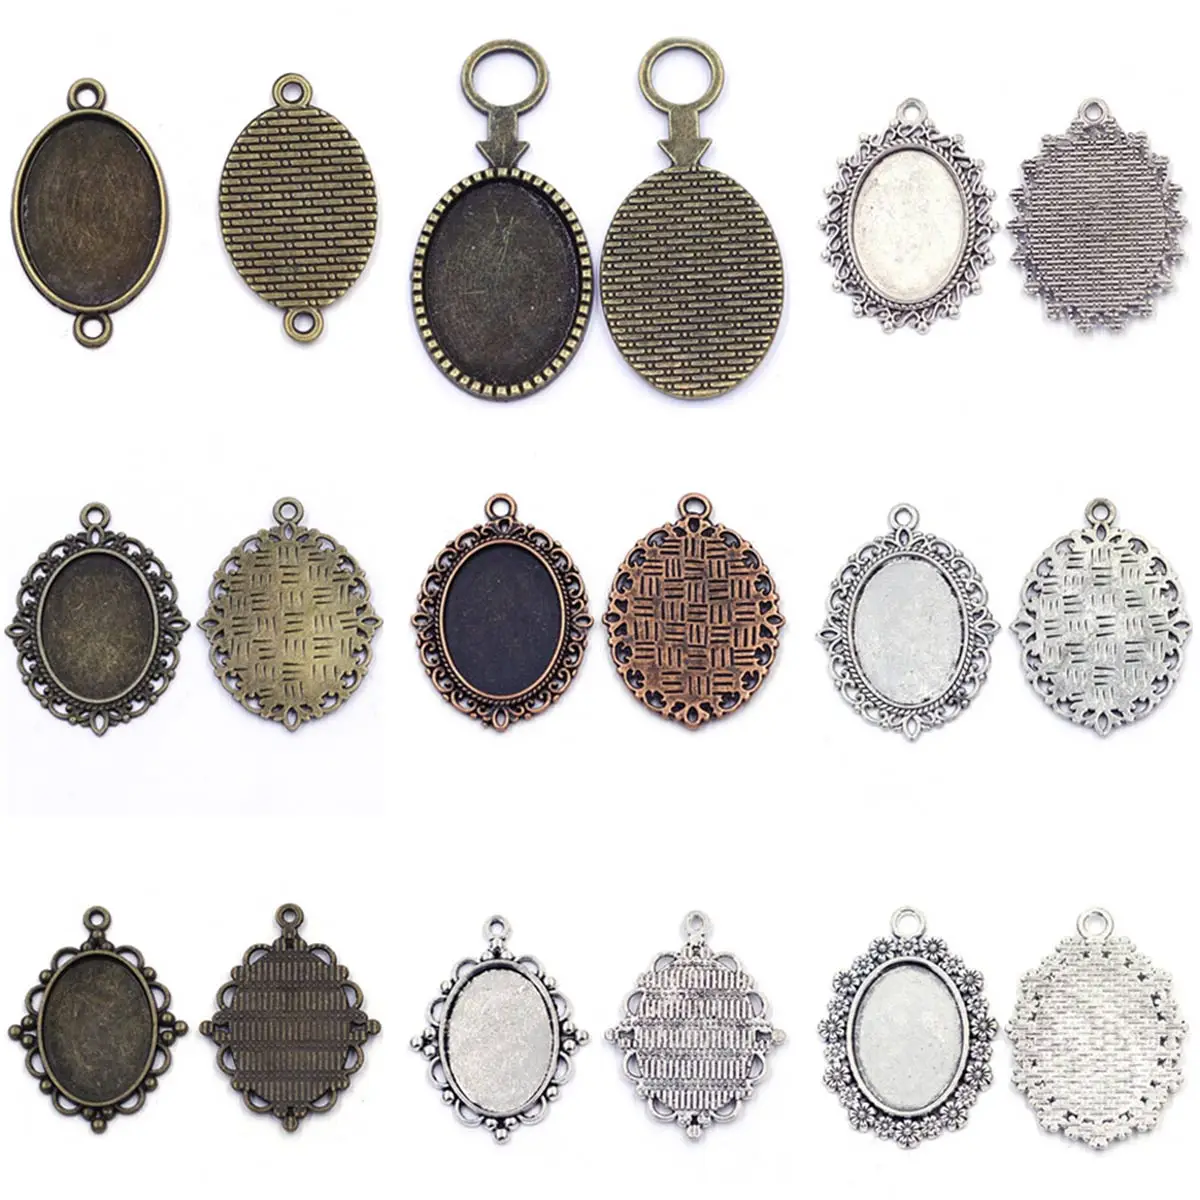 

10PCS Mixed Oval Charm Pendants DIY Blank Cameo Base Settings Fit Cabochon 25x18mm Jewelry Crafts Accessories Handmade Materials